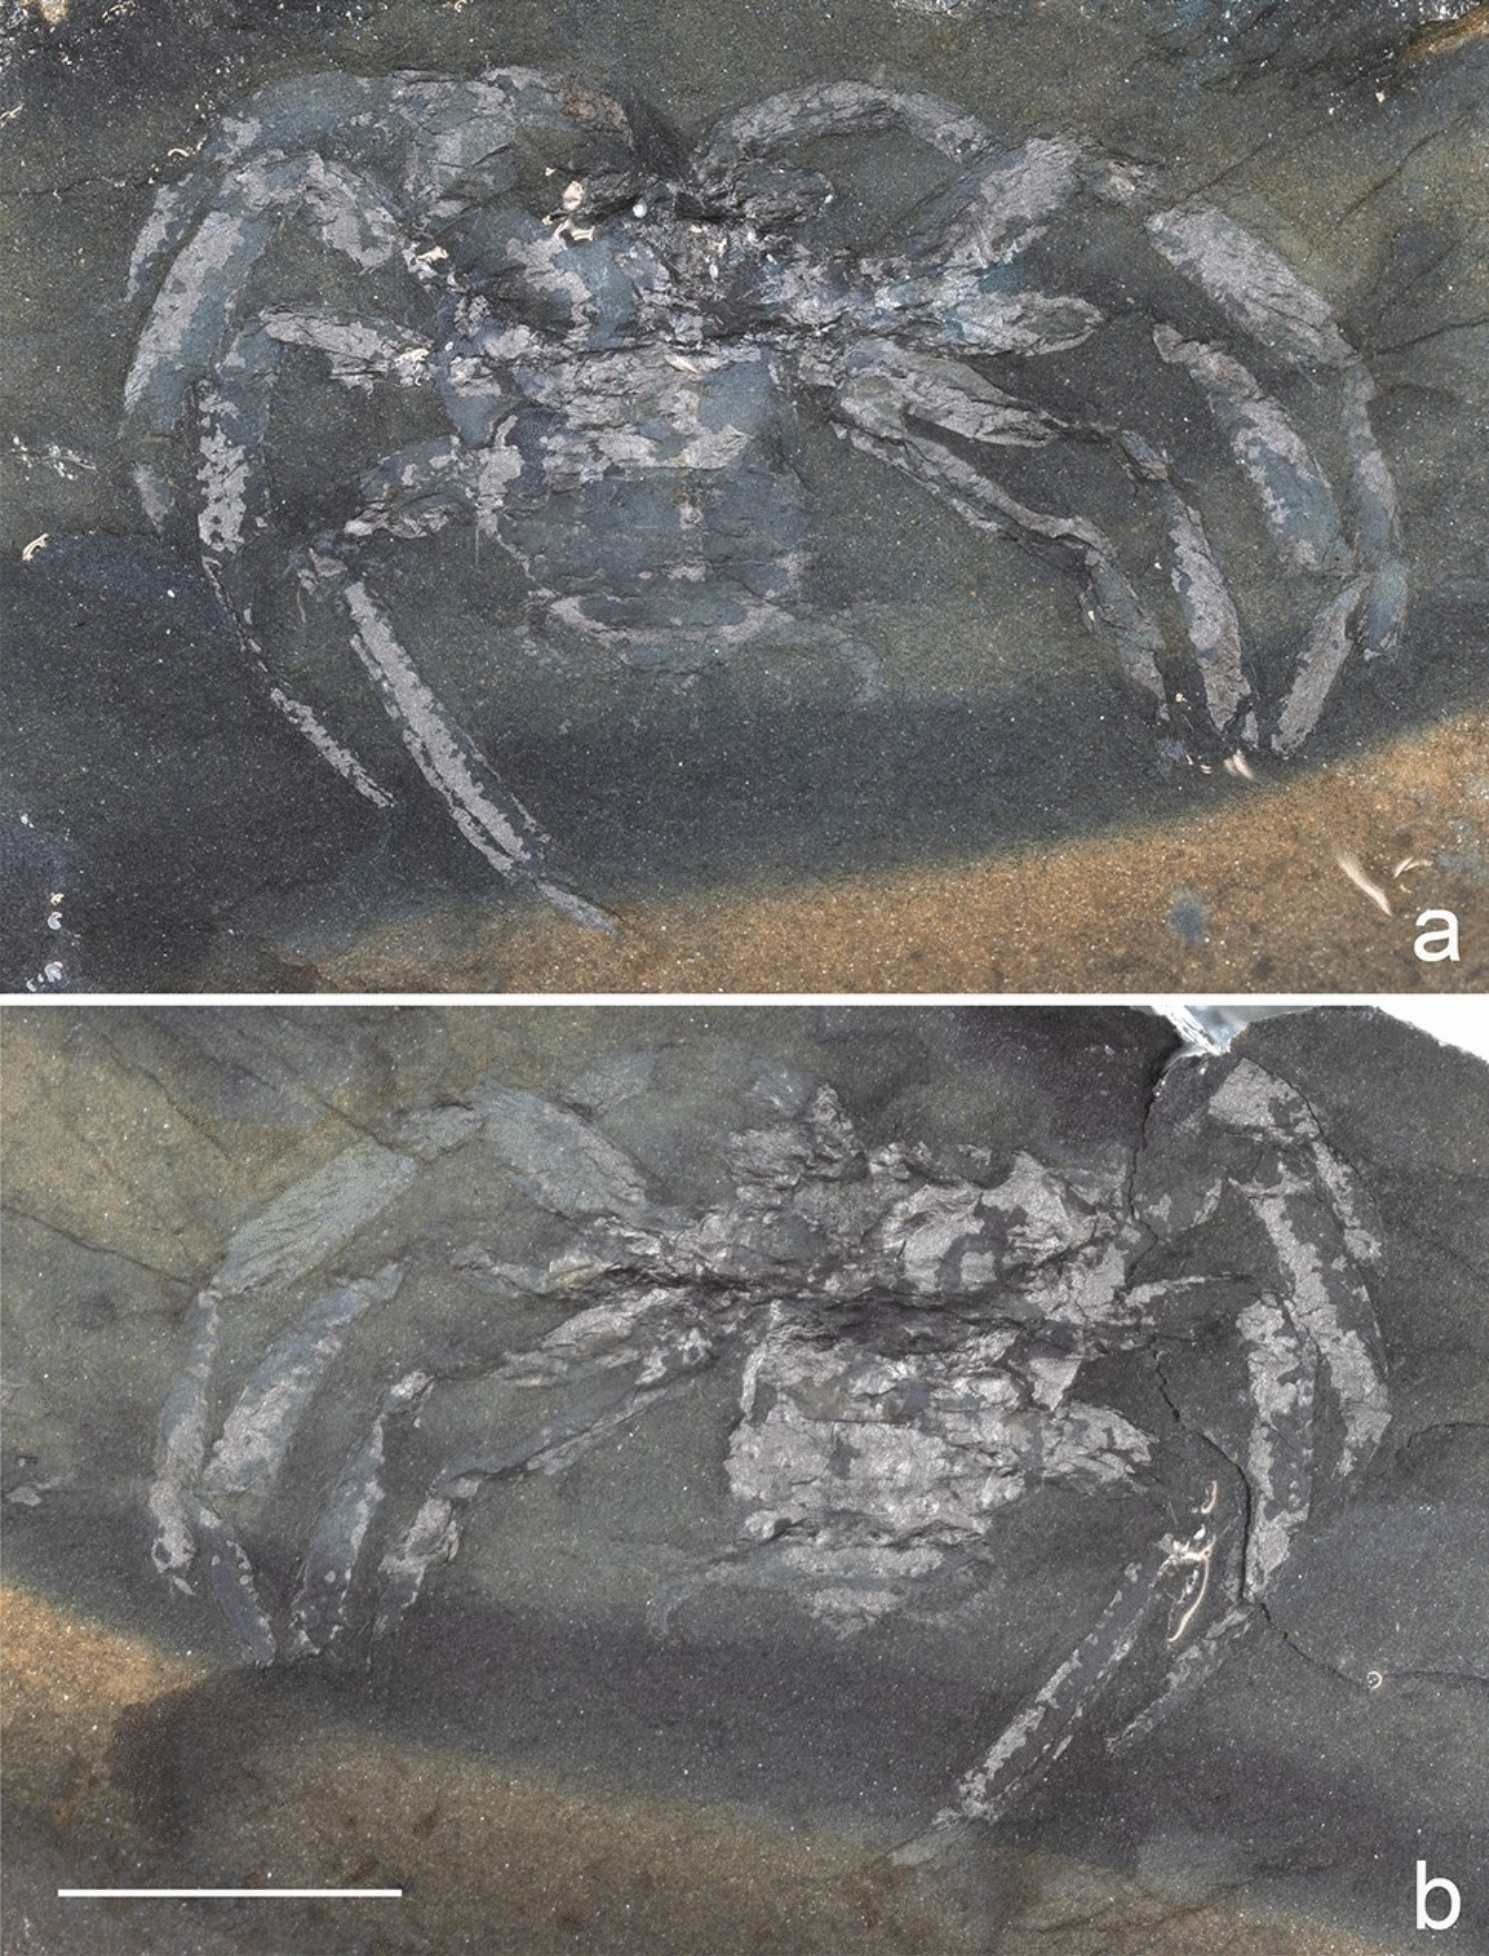 Arthrolycosa wolterbeeki sp. nov., the oldest fossil spider (Arachnida: Araneae) from Germany, from the late Carboniferous of Piesberg near Osnabruck, Lower Saxony.